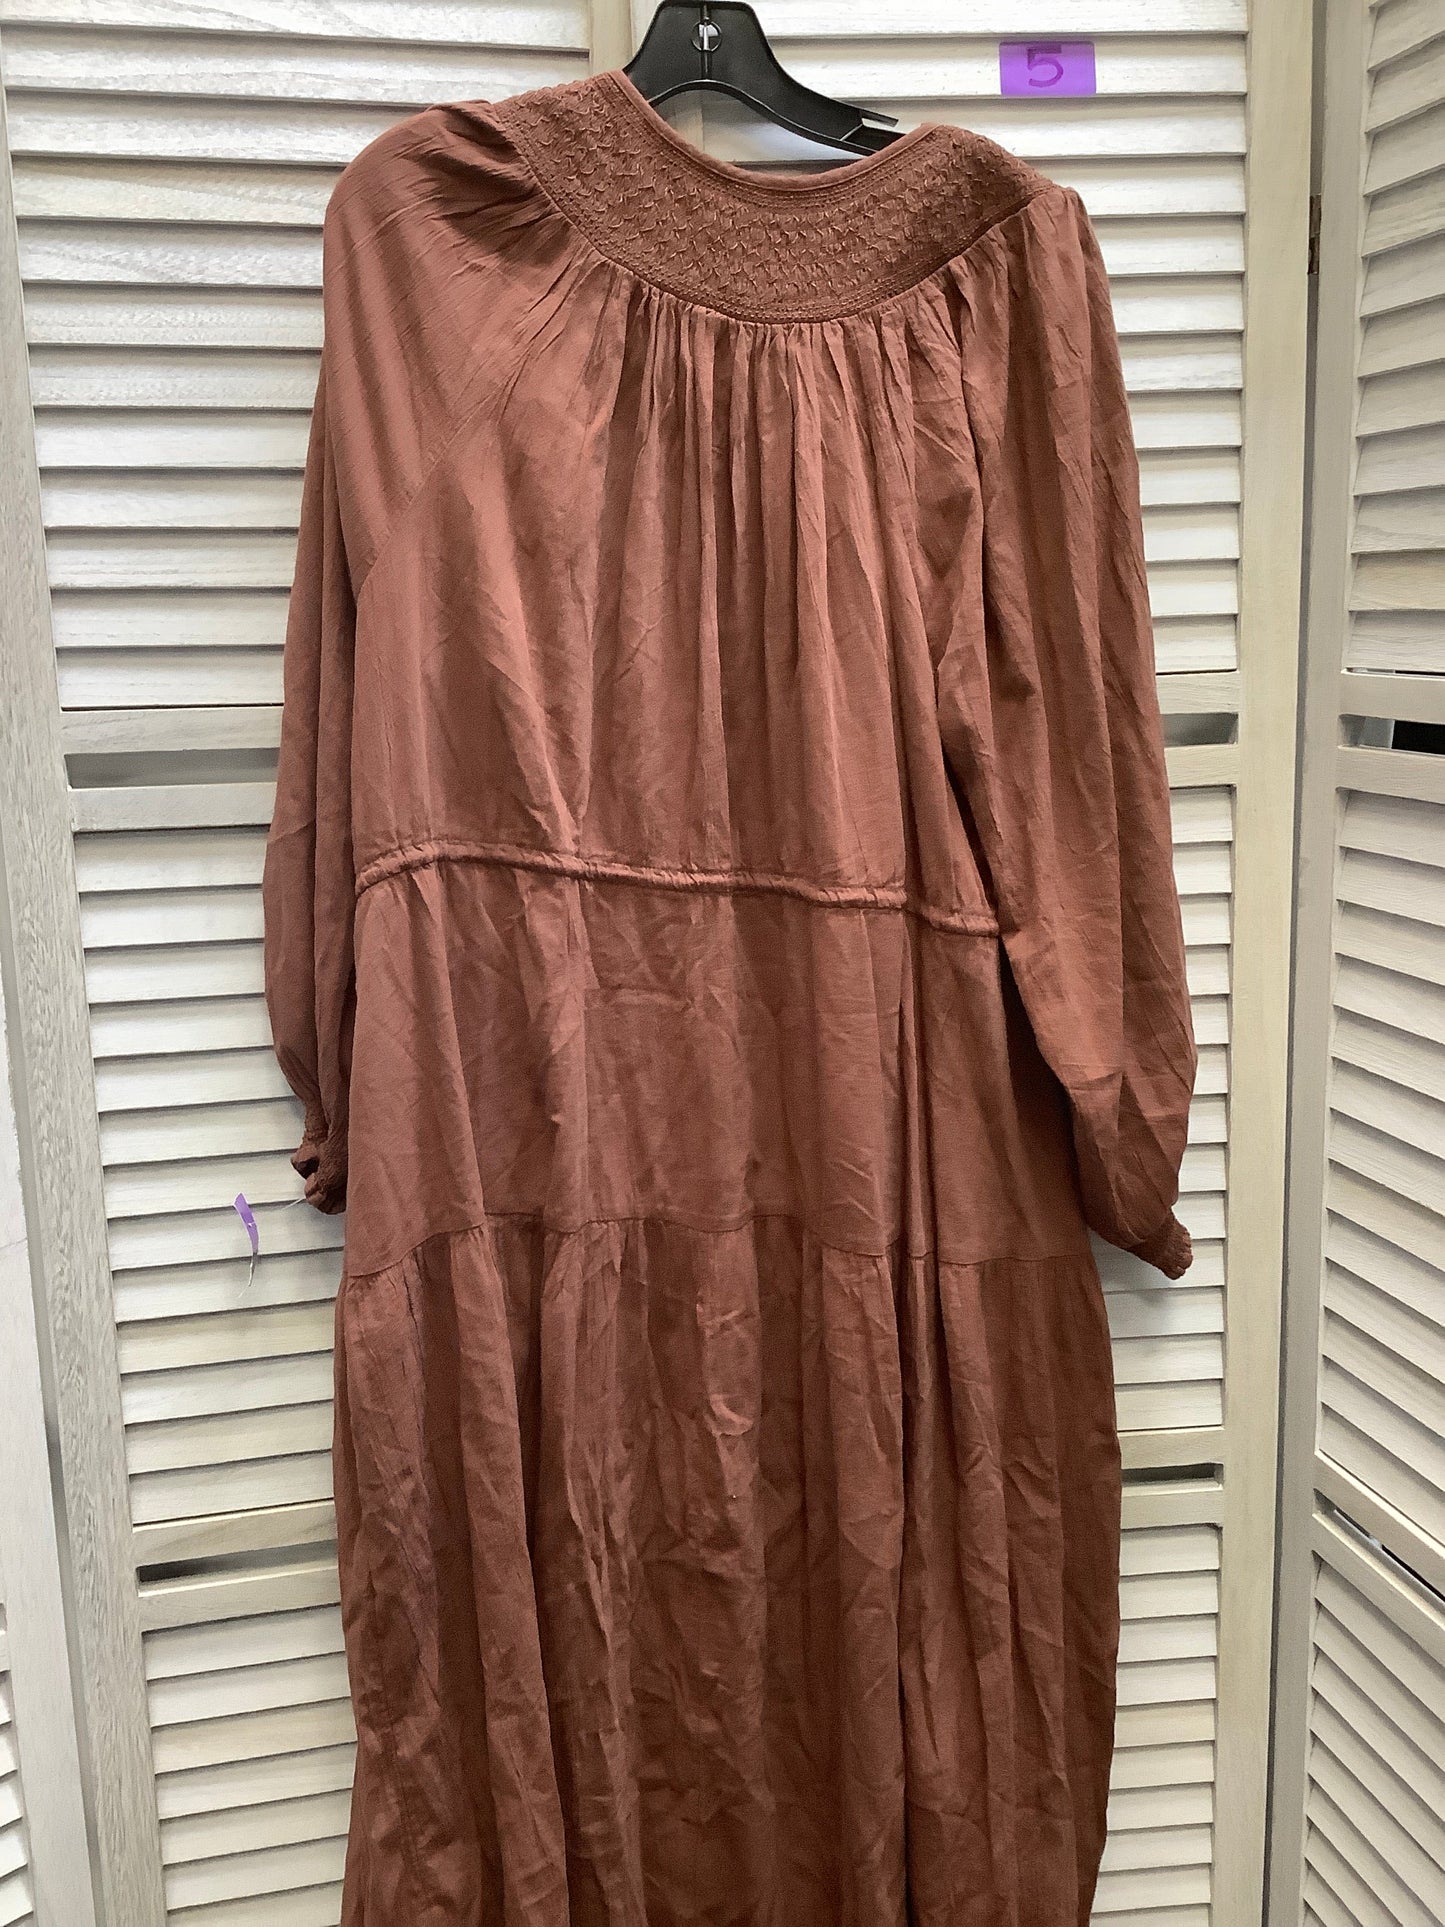 Brown Dress Casual Short Old Navy, Size 2x